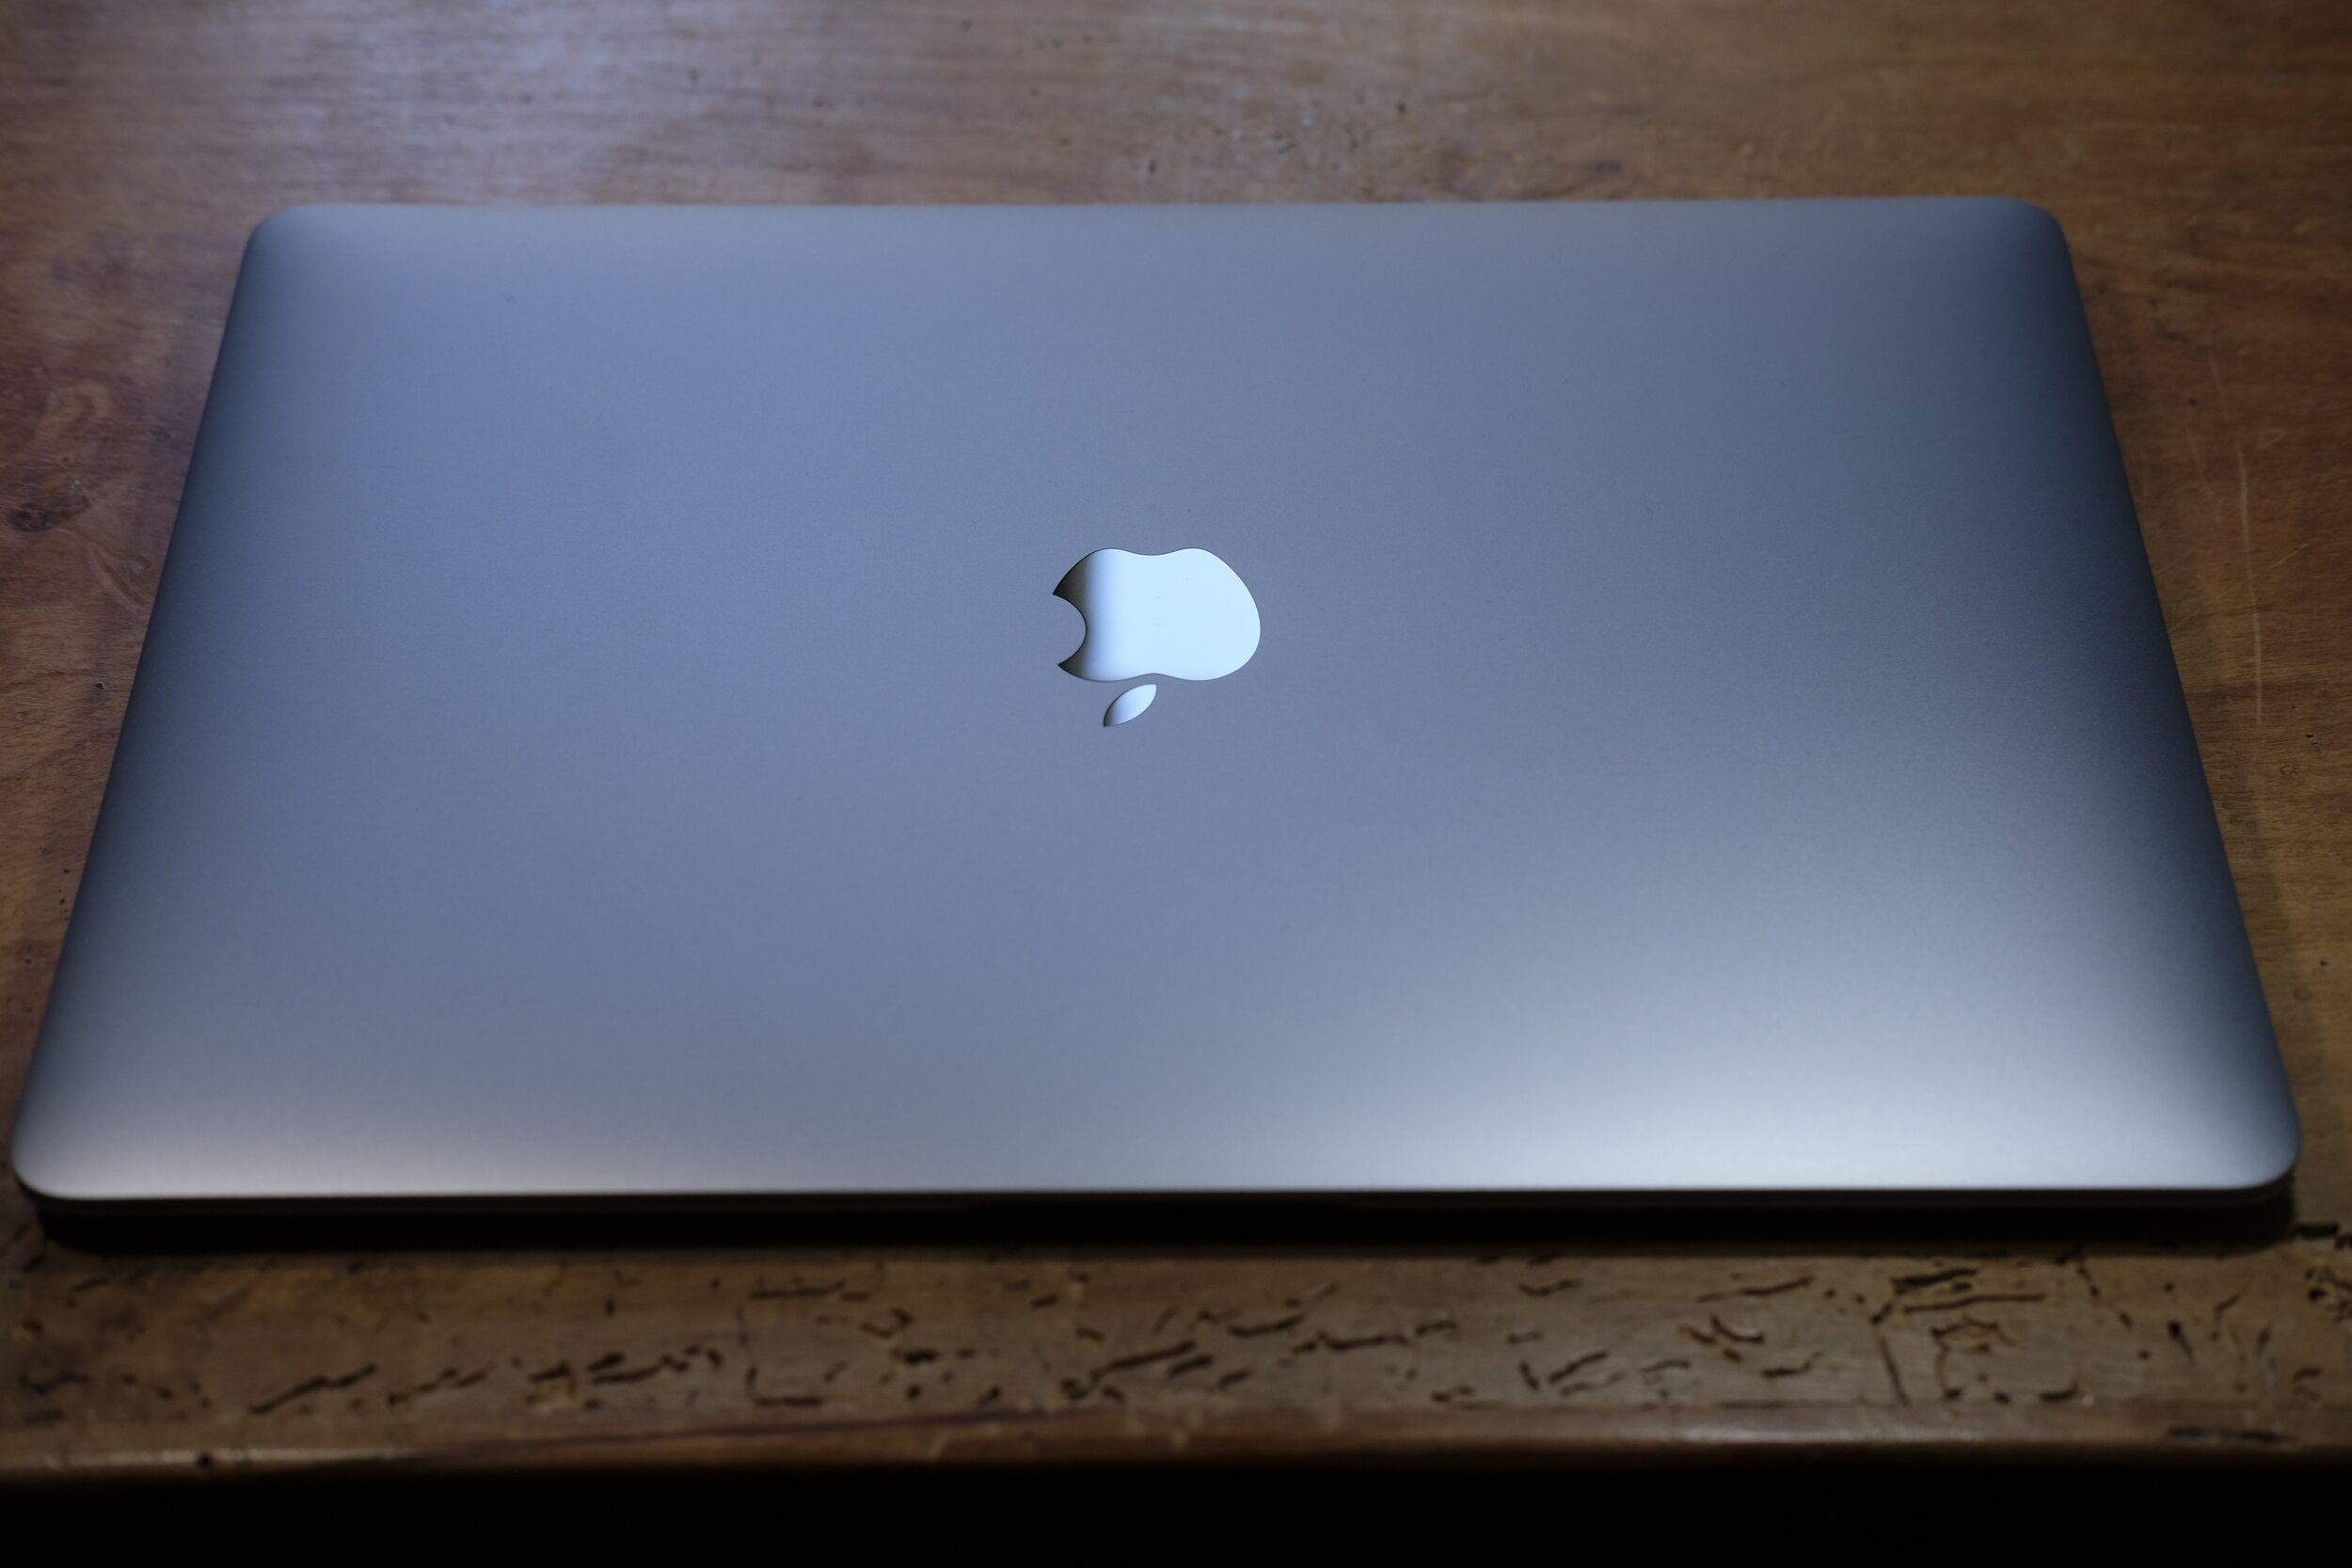 Apple MacBook Air i7 2020 from the perspective of a Music Producer